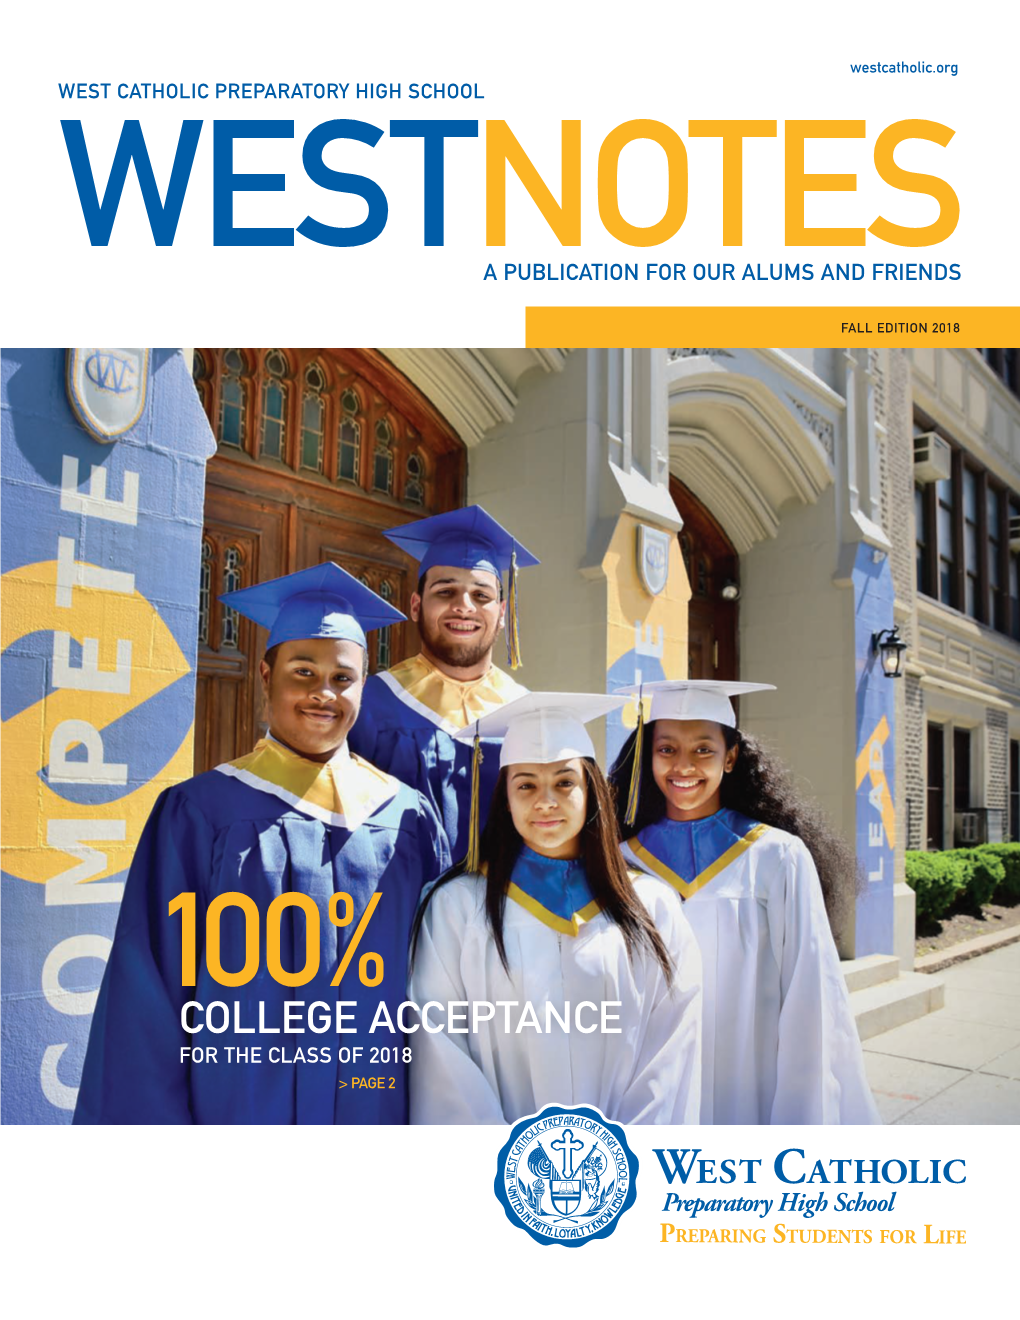 Westnotesa Publication for Our Alums and Friends